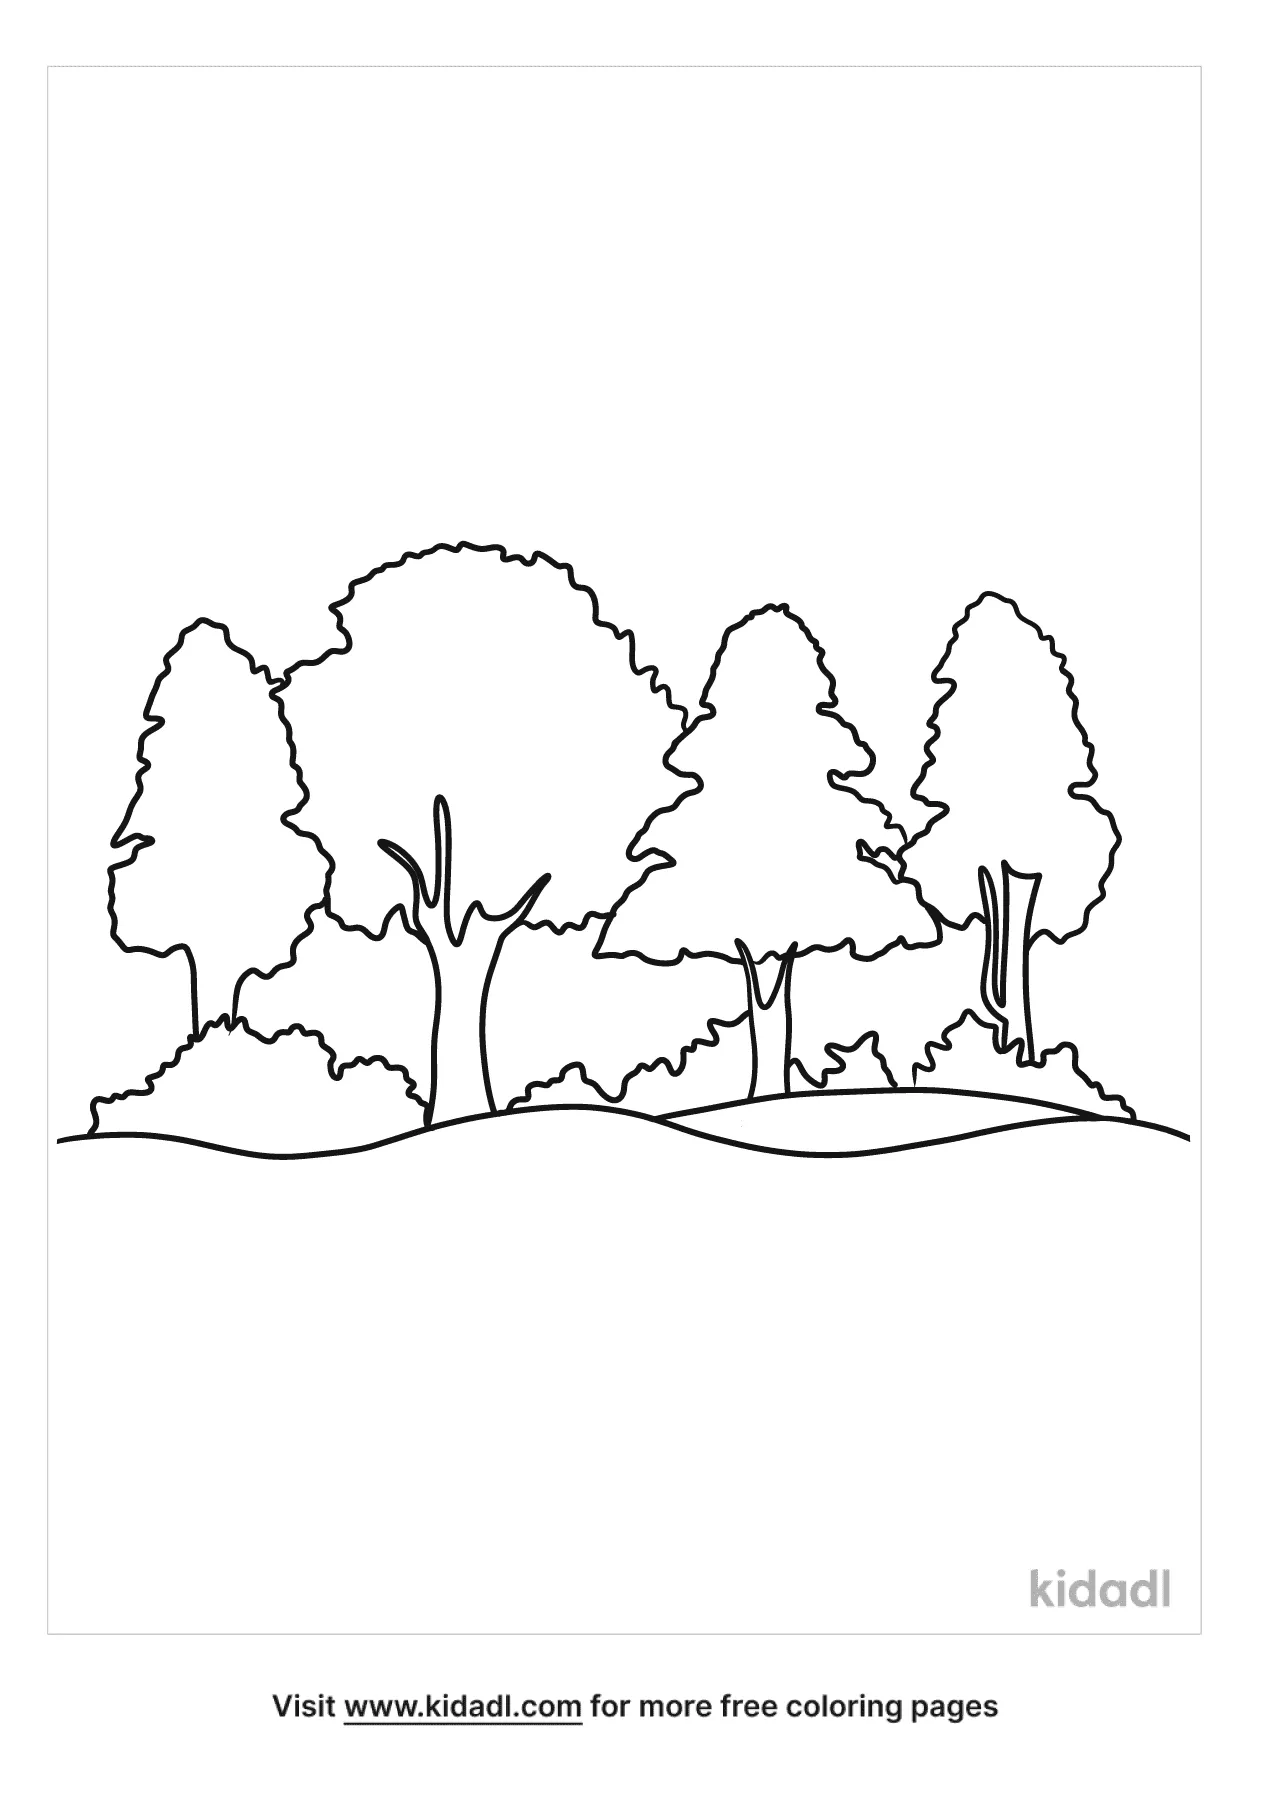 free ecosystem coloring pages